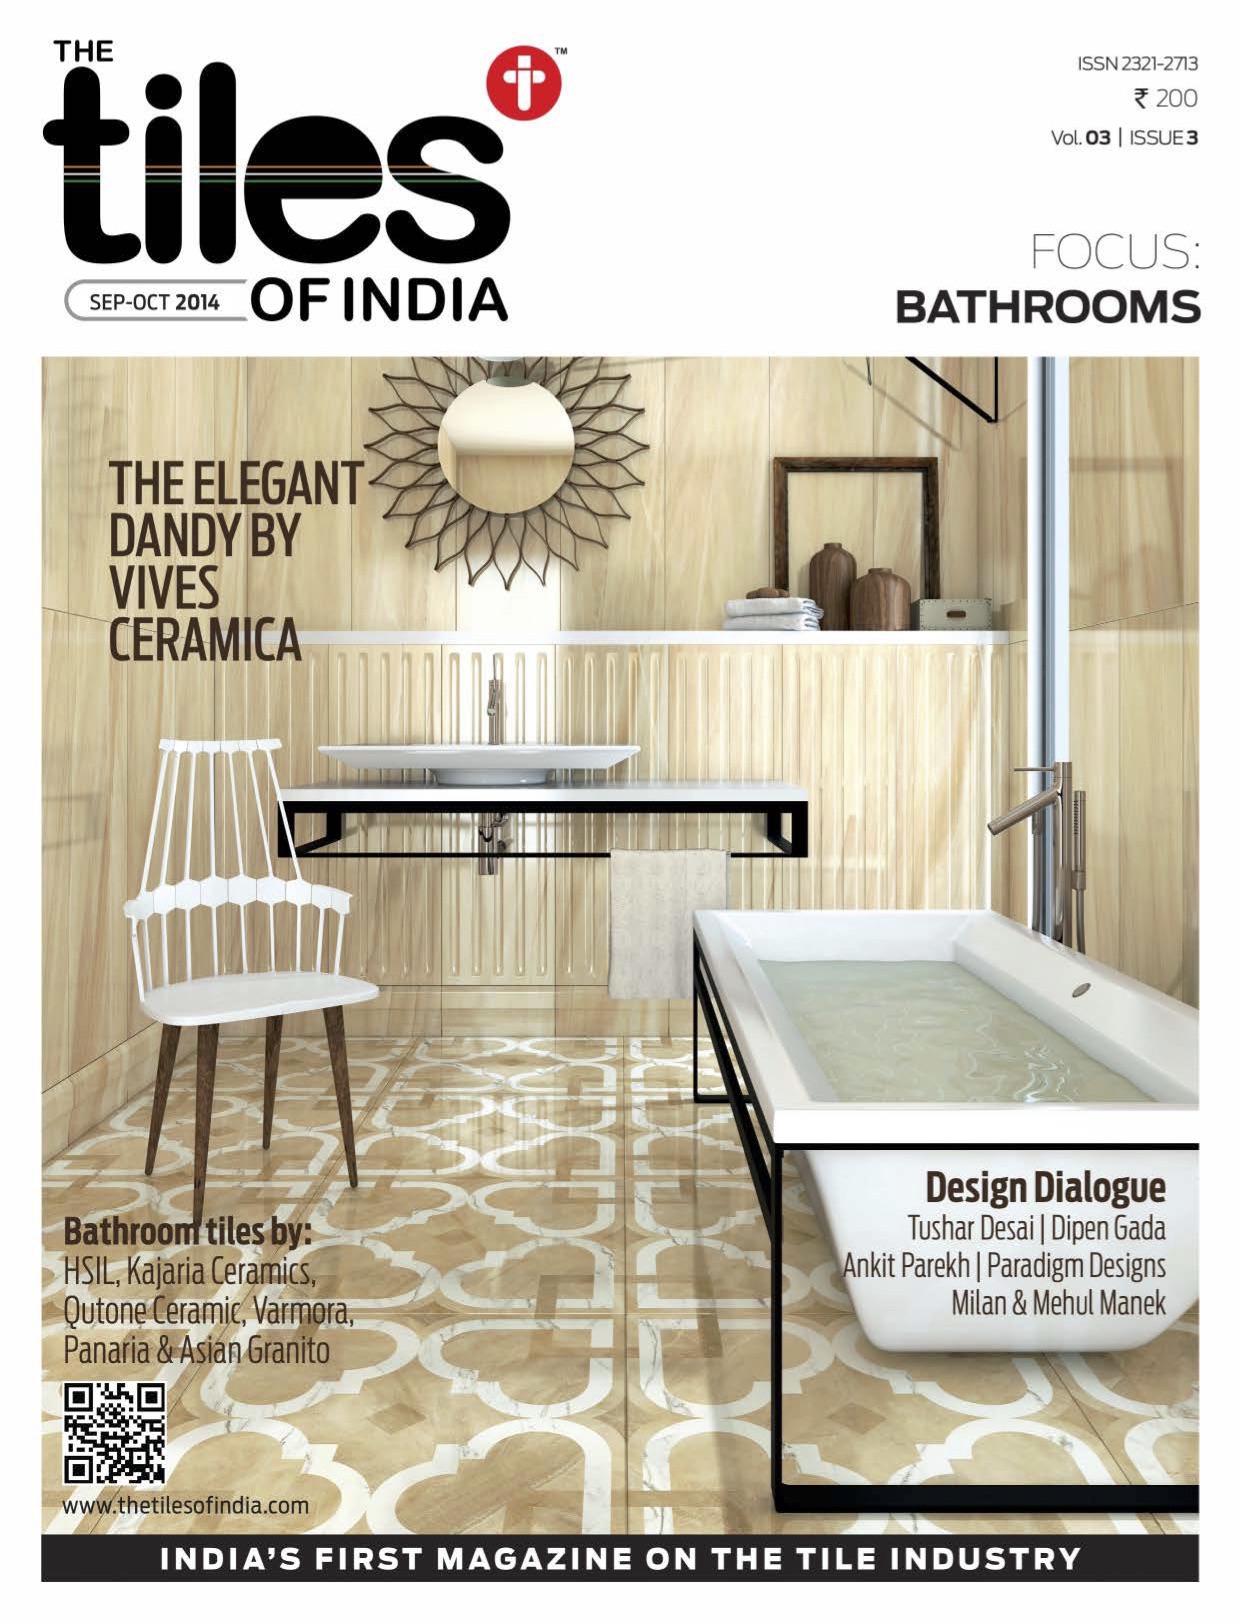 The Tiles of India Magazine - Sep Oct 2014 Issue